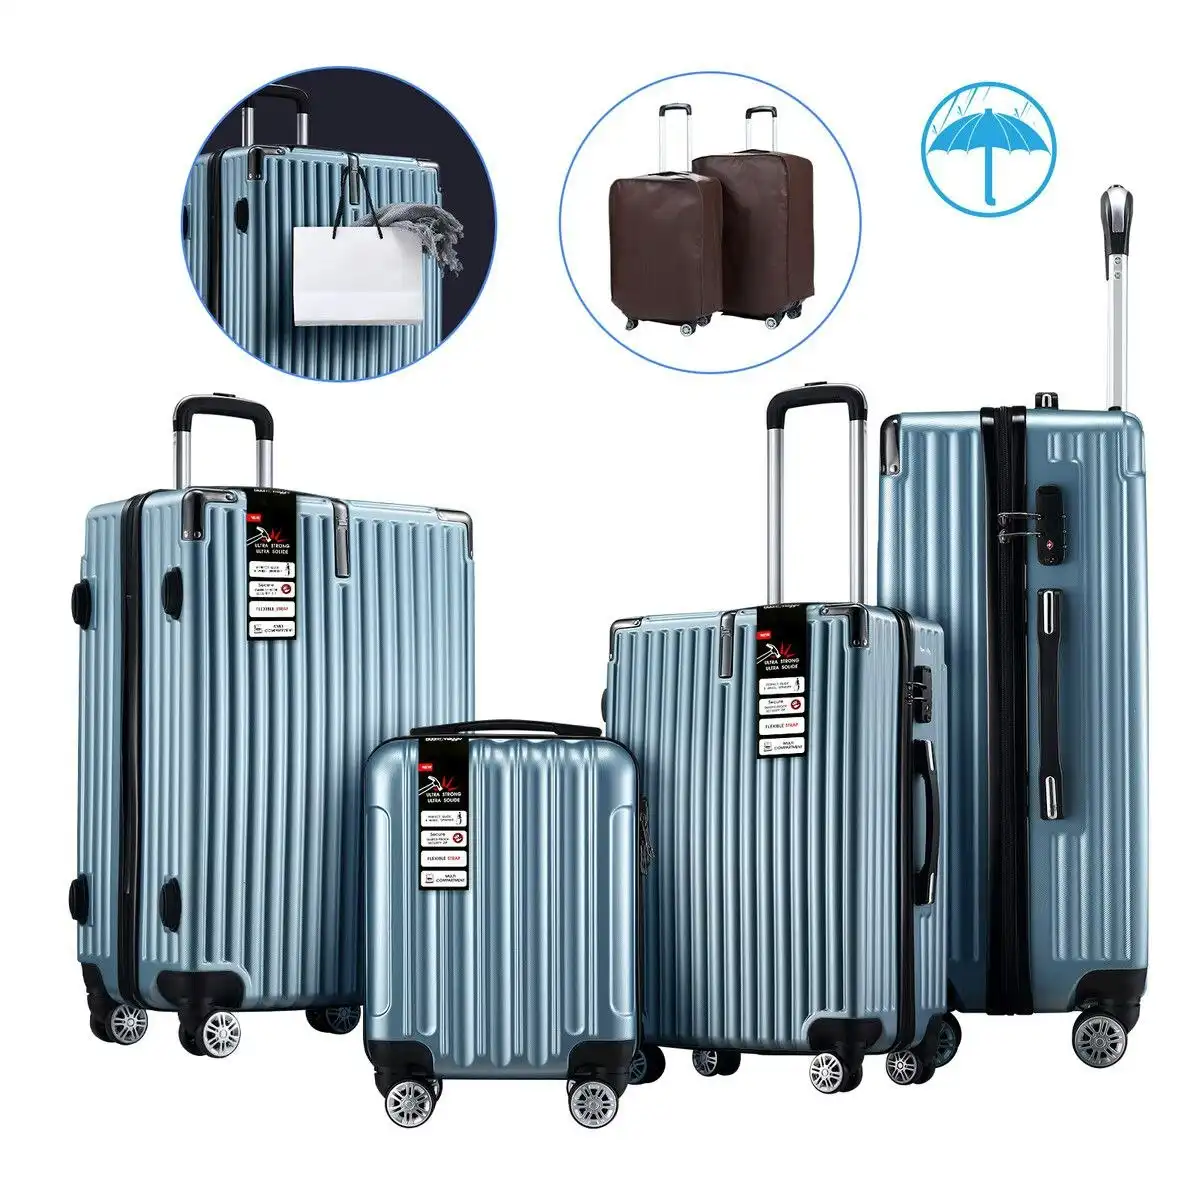 Ausway 4 Piece Luggage Suitcase Set Carry On Traveller Bag Hard Shell Rolling Trolley Checked TSA Lock Front Hook Lightweight Ice Blue